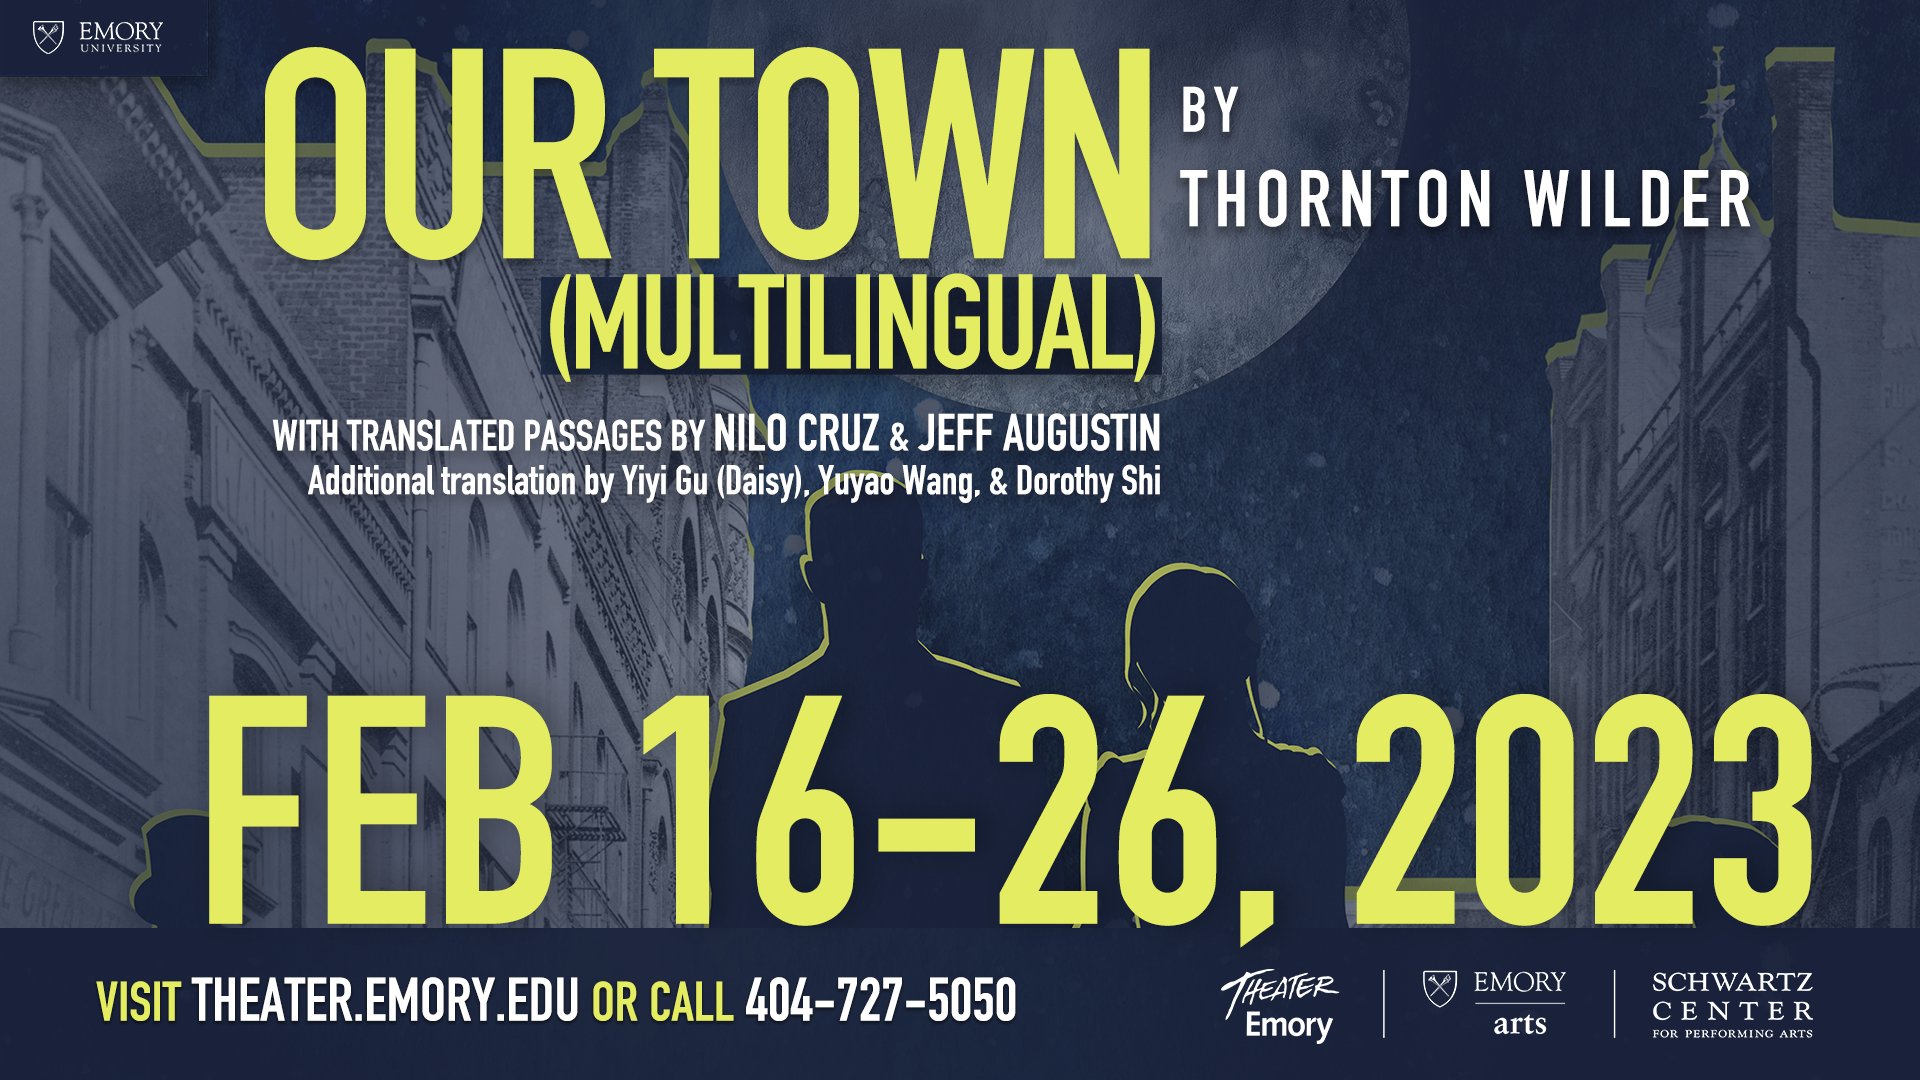 ourtown_flyer_1920x1080.png